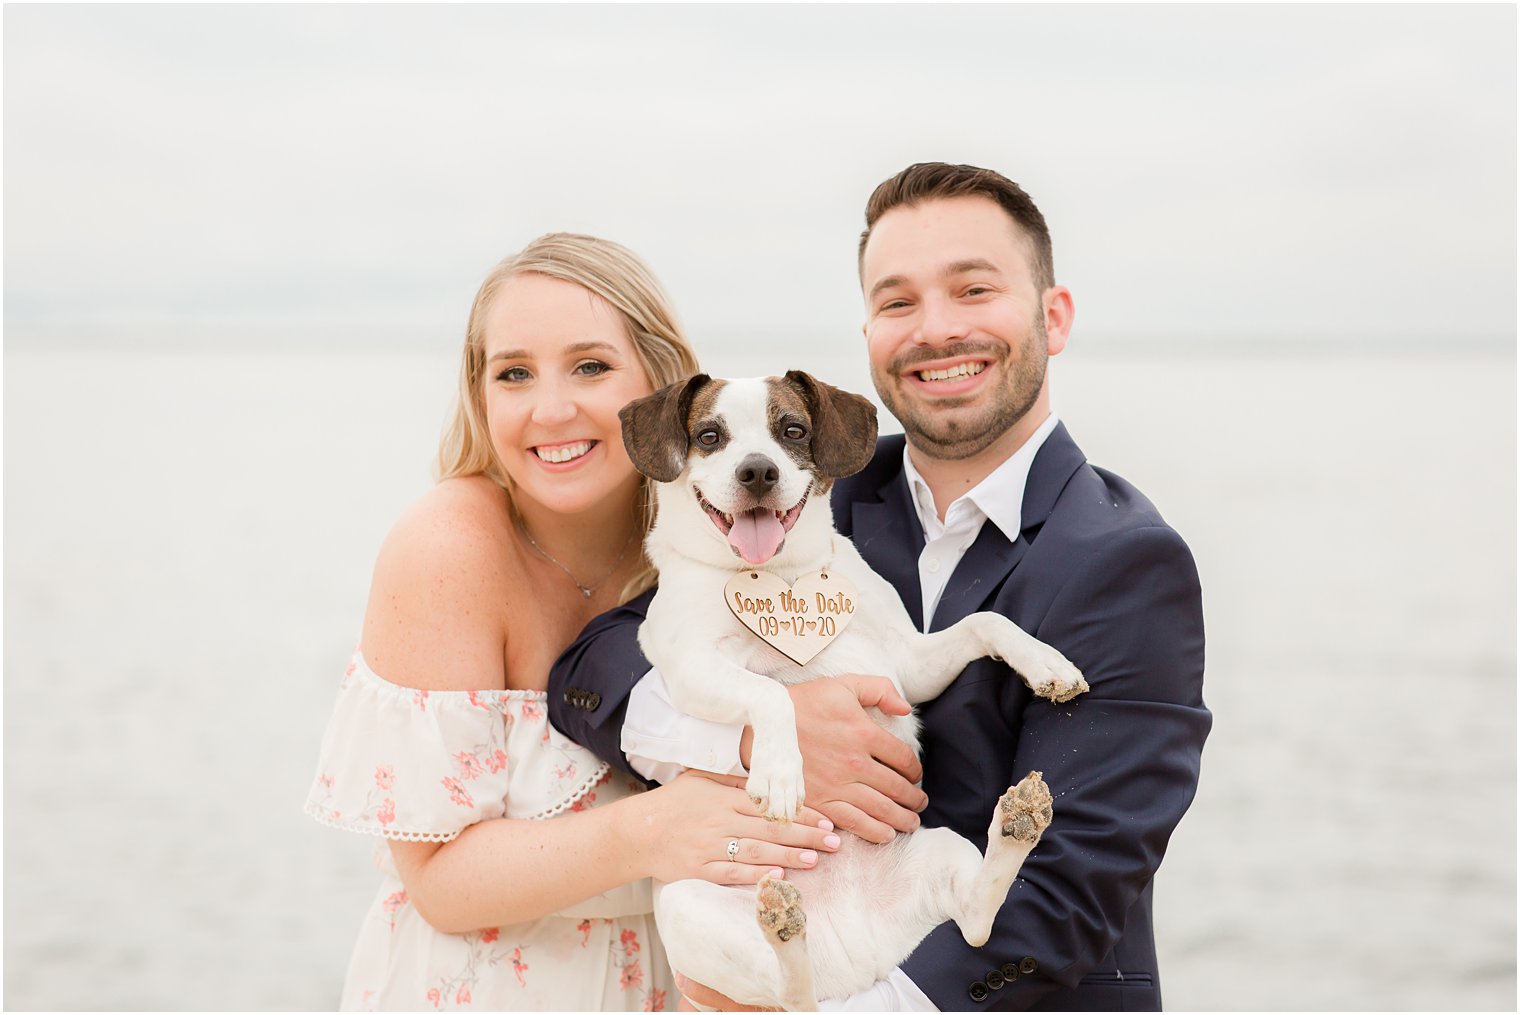 How to include your dog in your engagement photos